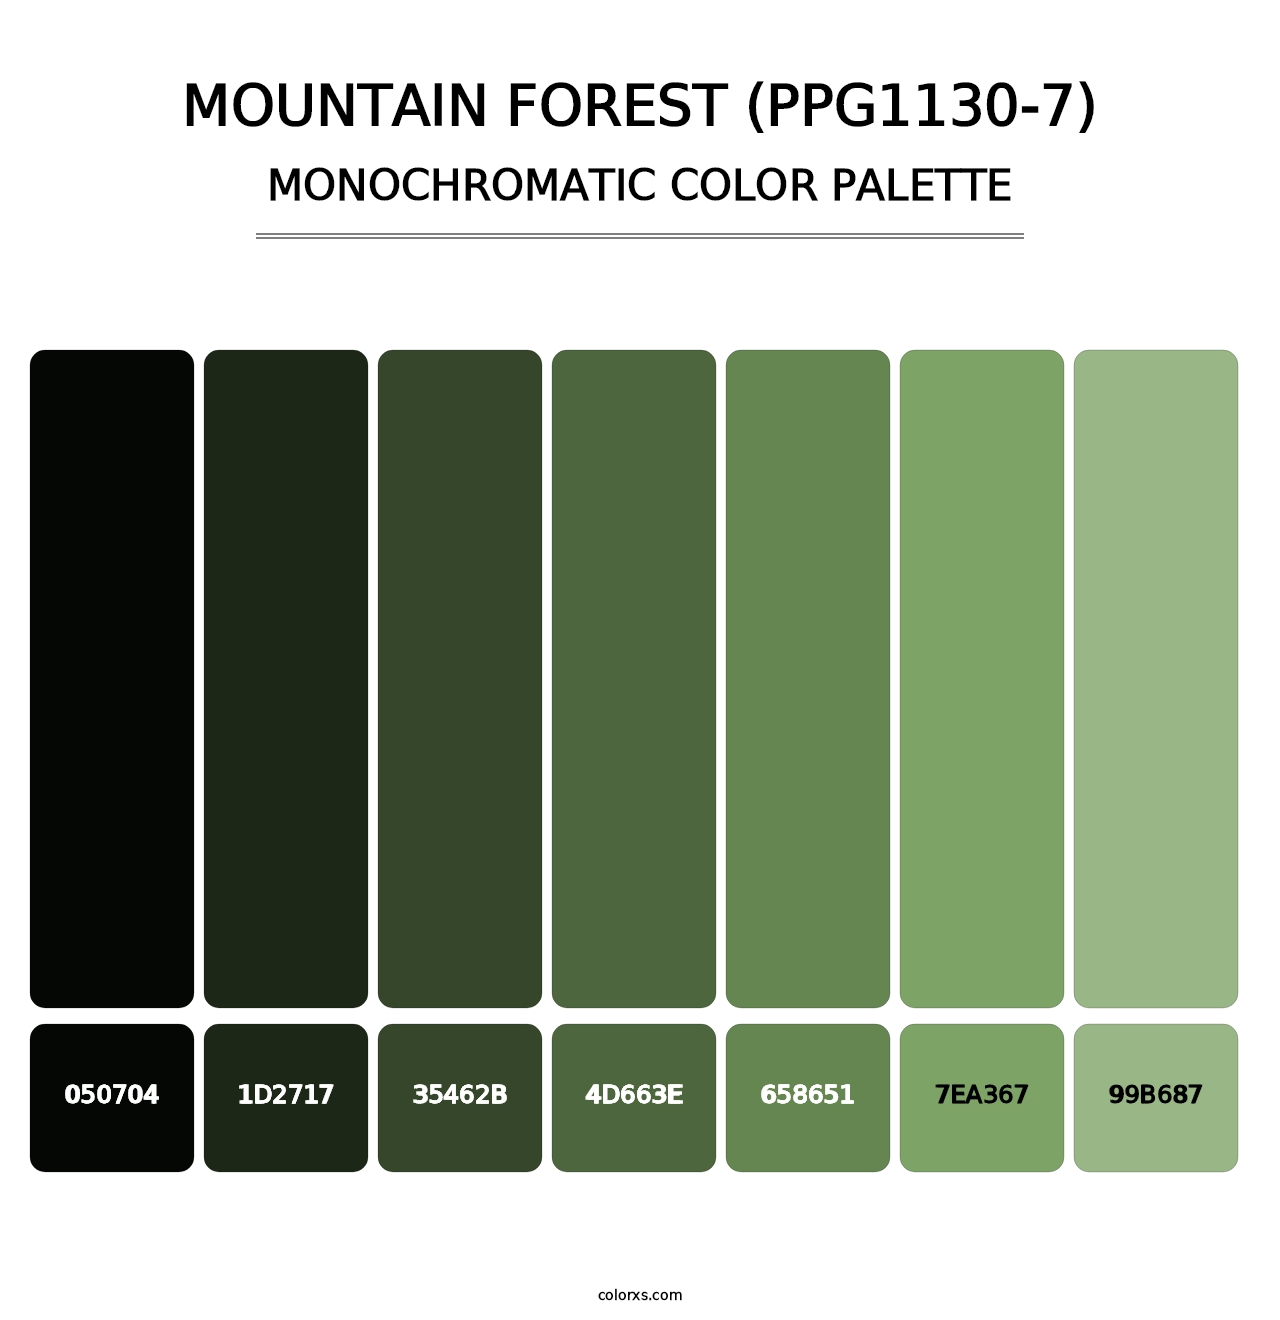 Mountain Forest (PPG1130-7) - Monochromatic Color Palette